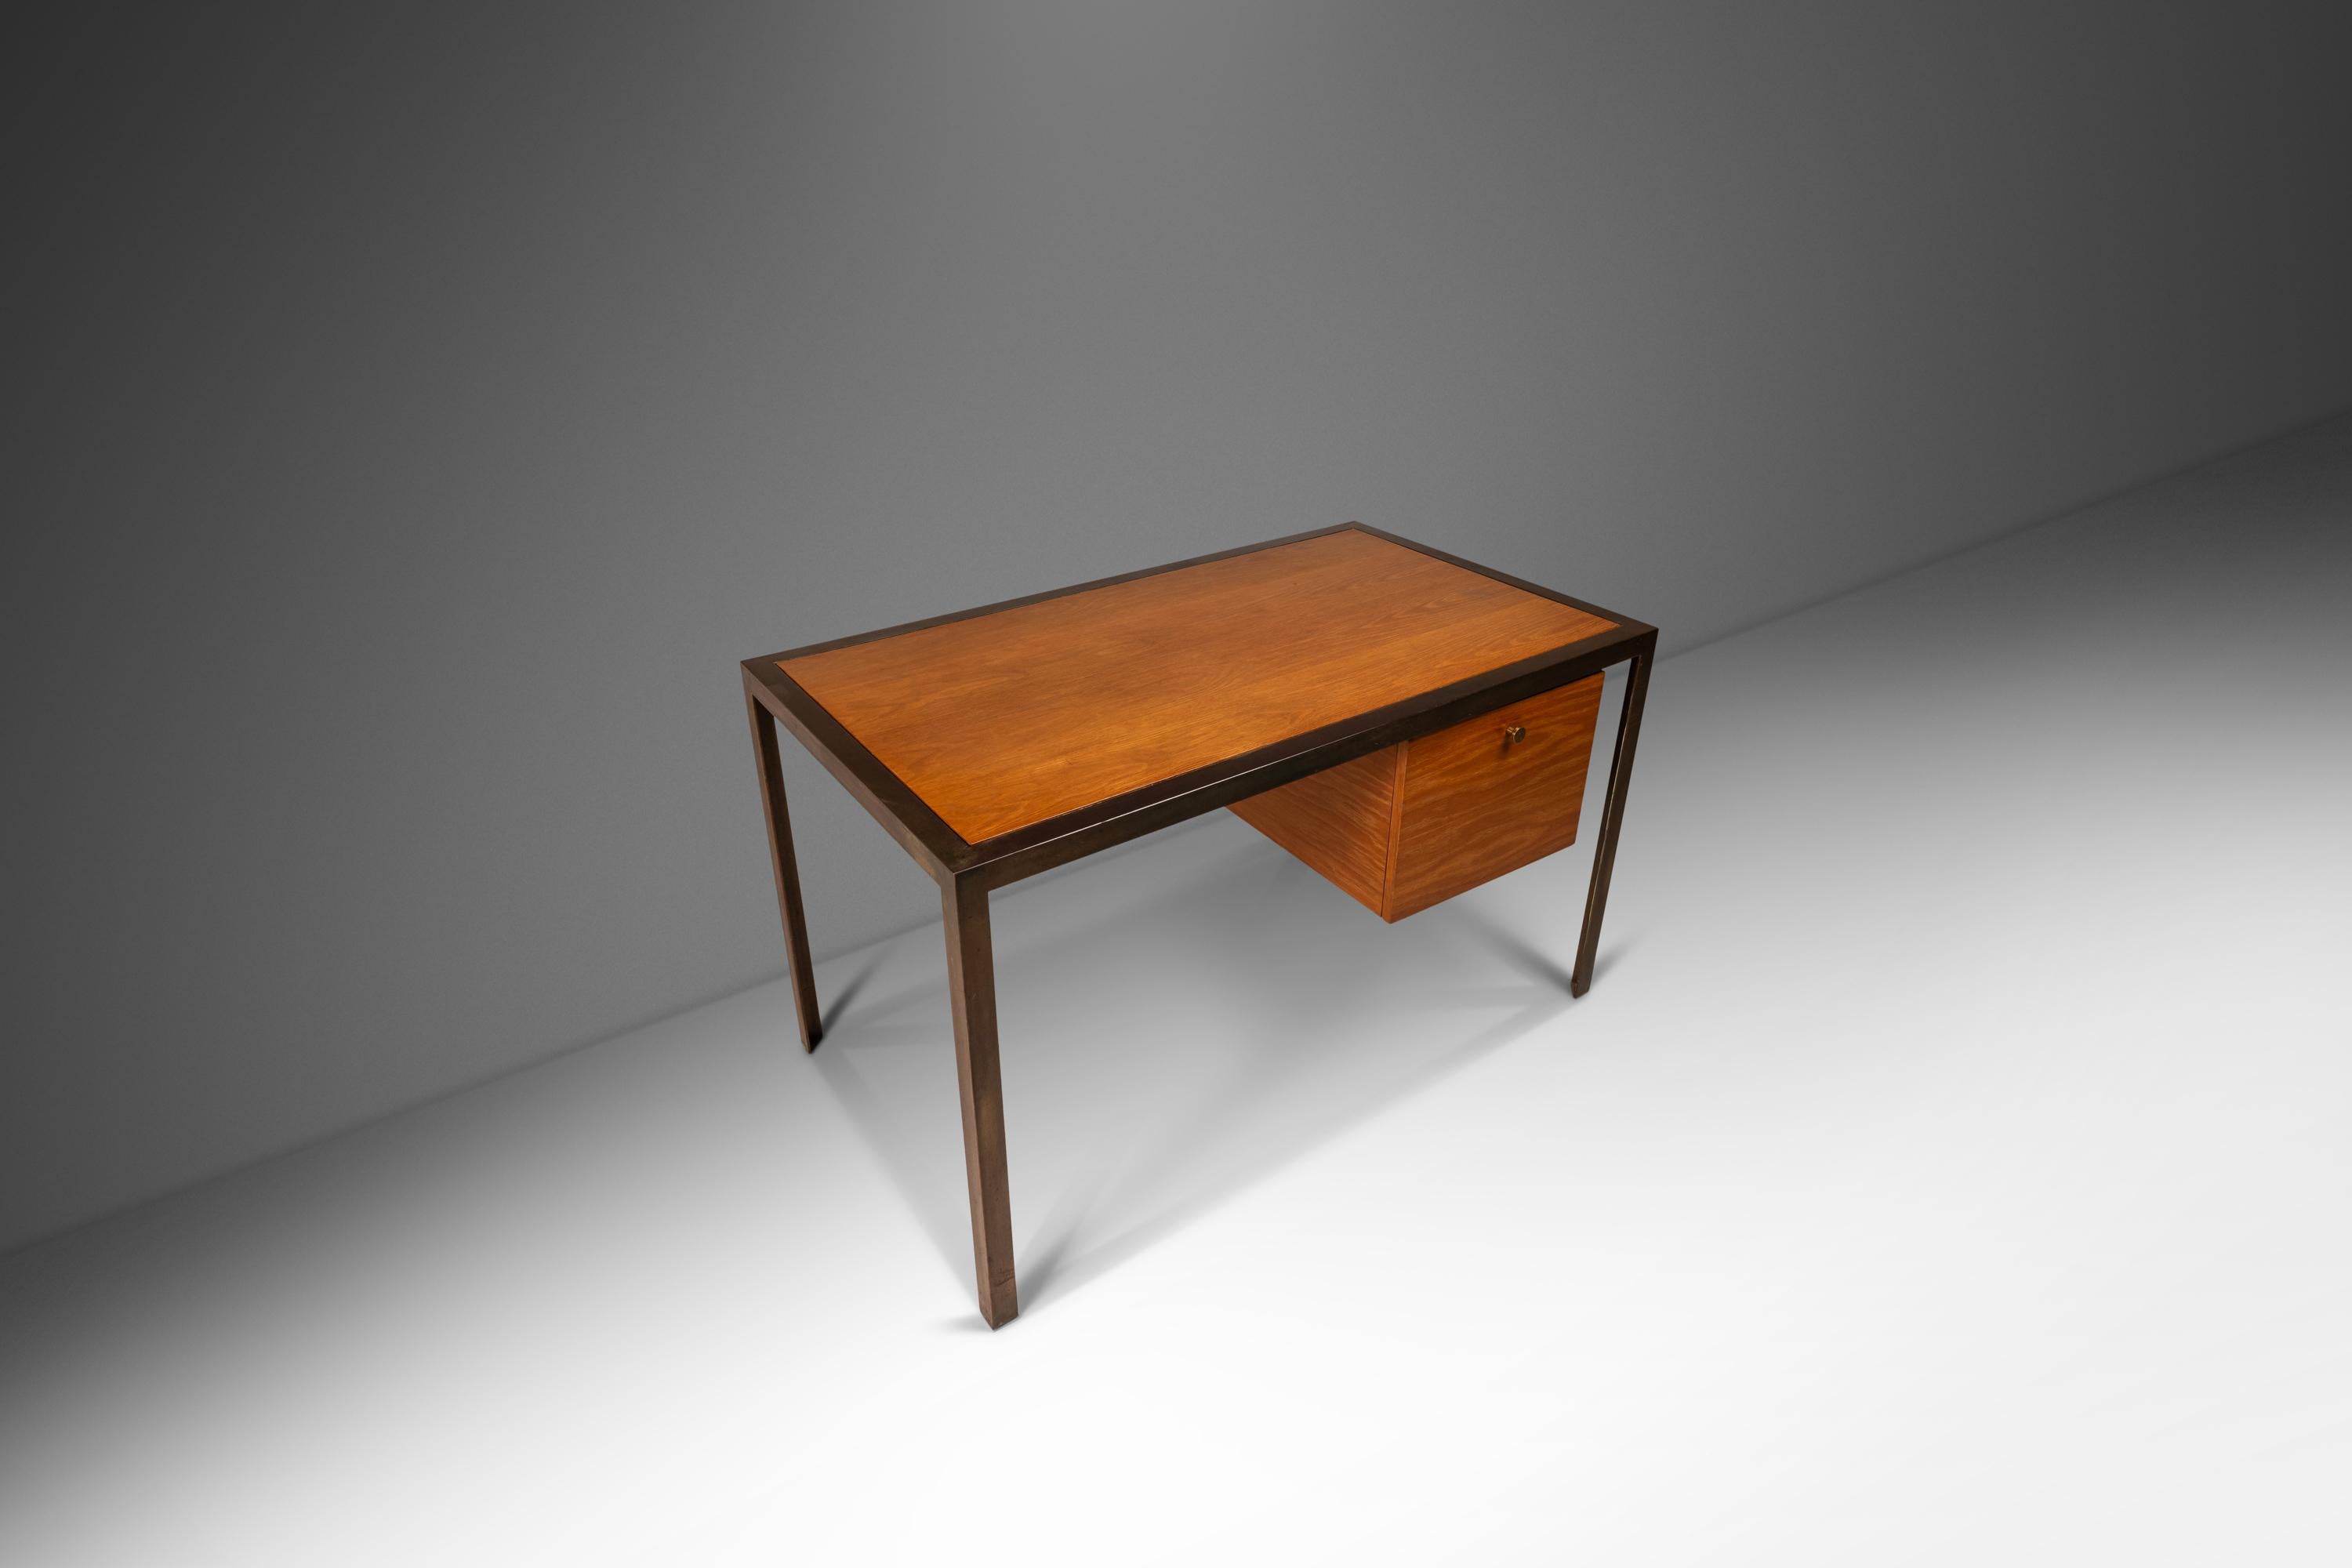 Simultaneously minimal and stylish this exceptional writers desk, designed by Harry Lundstead, is the very epitome of Modern Contemporary Design. With its sleek, thoughtful and hidden details this desk is ideal for those short on space but unwilling